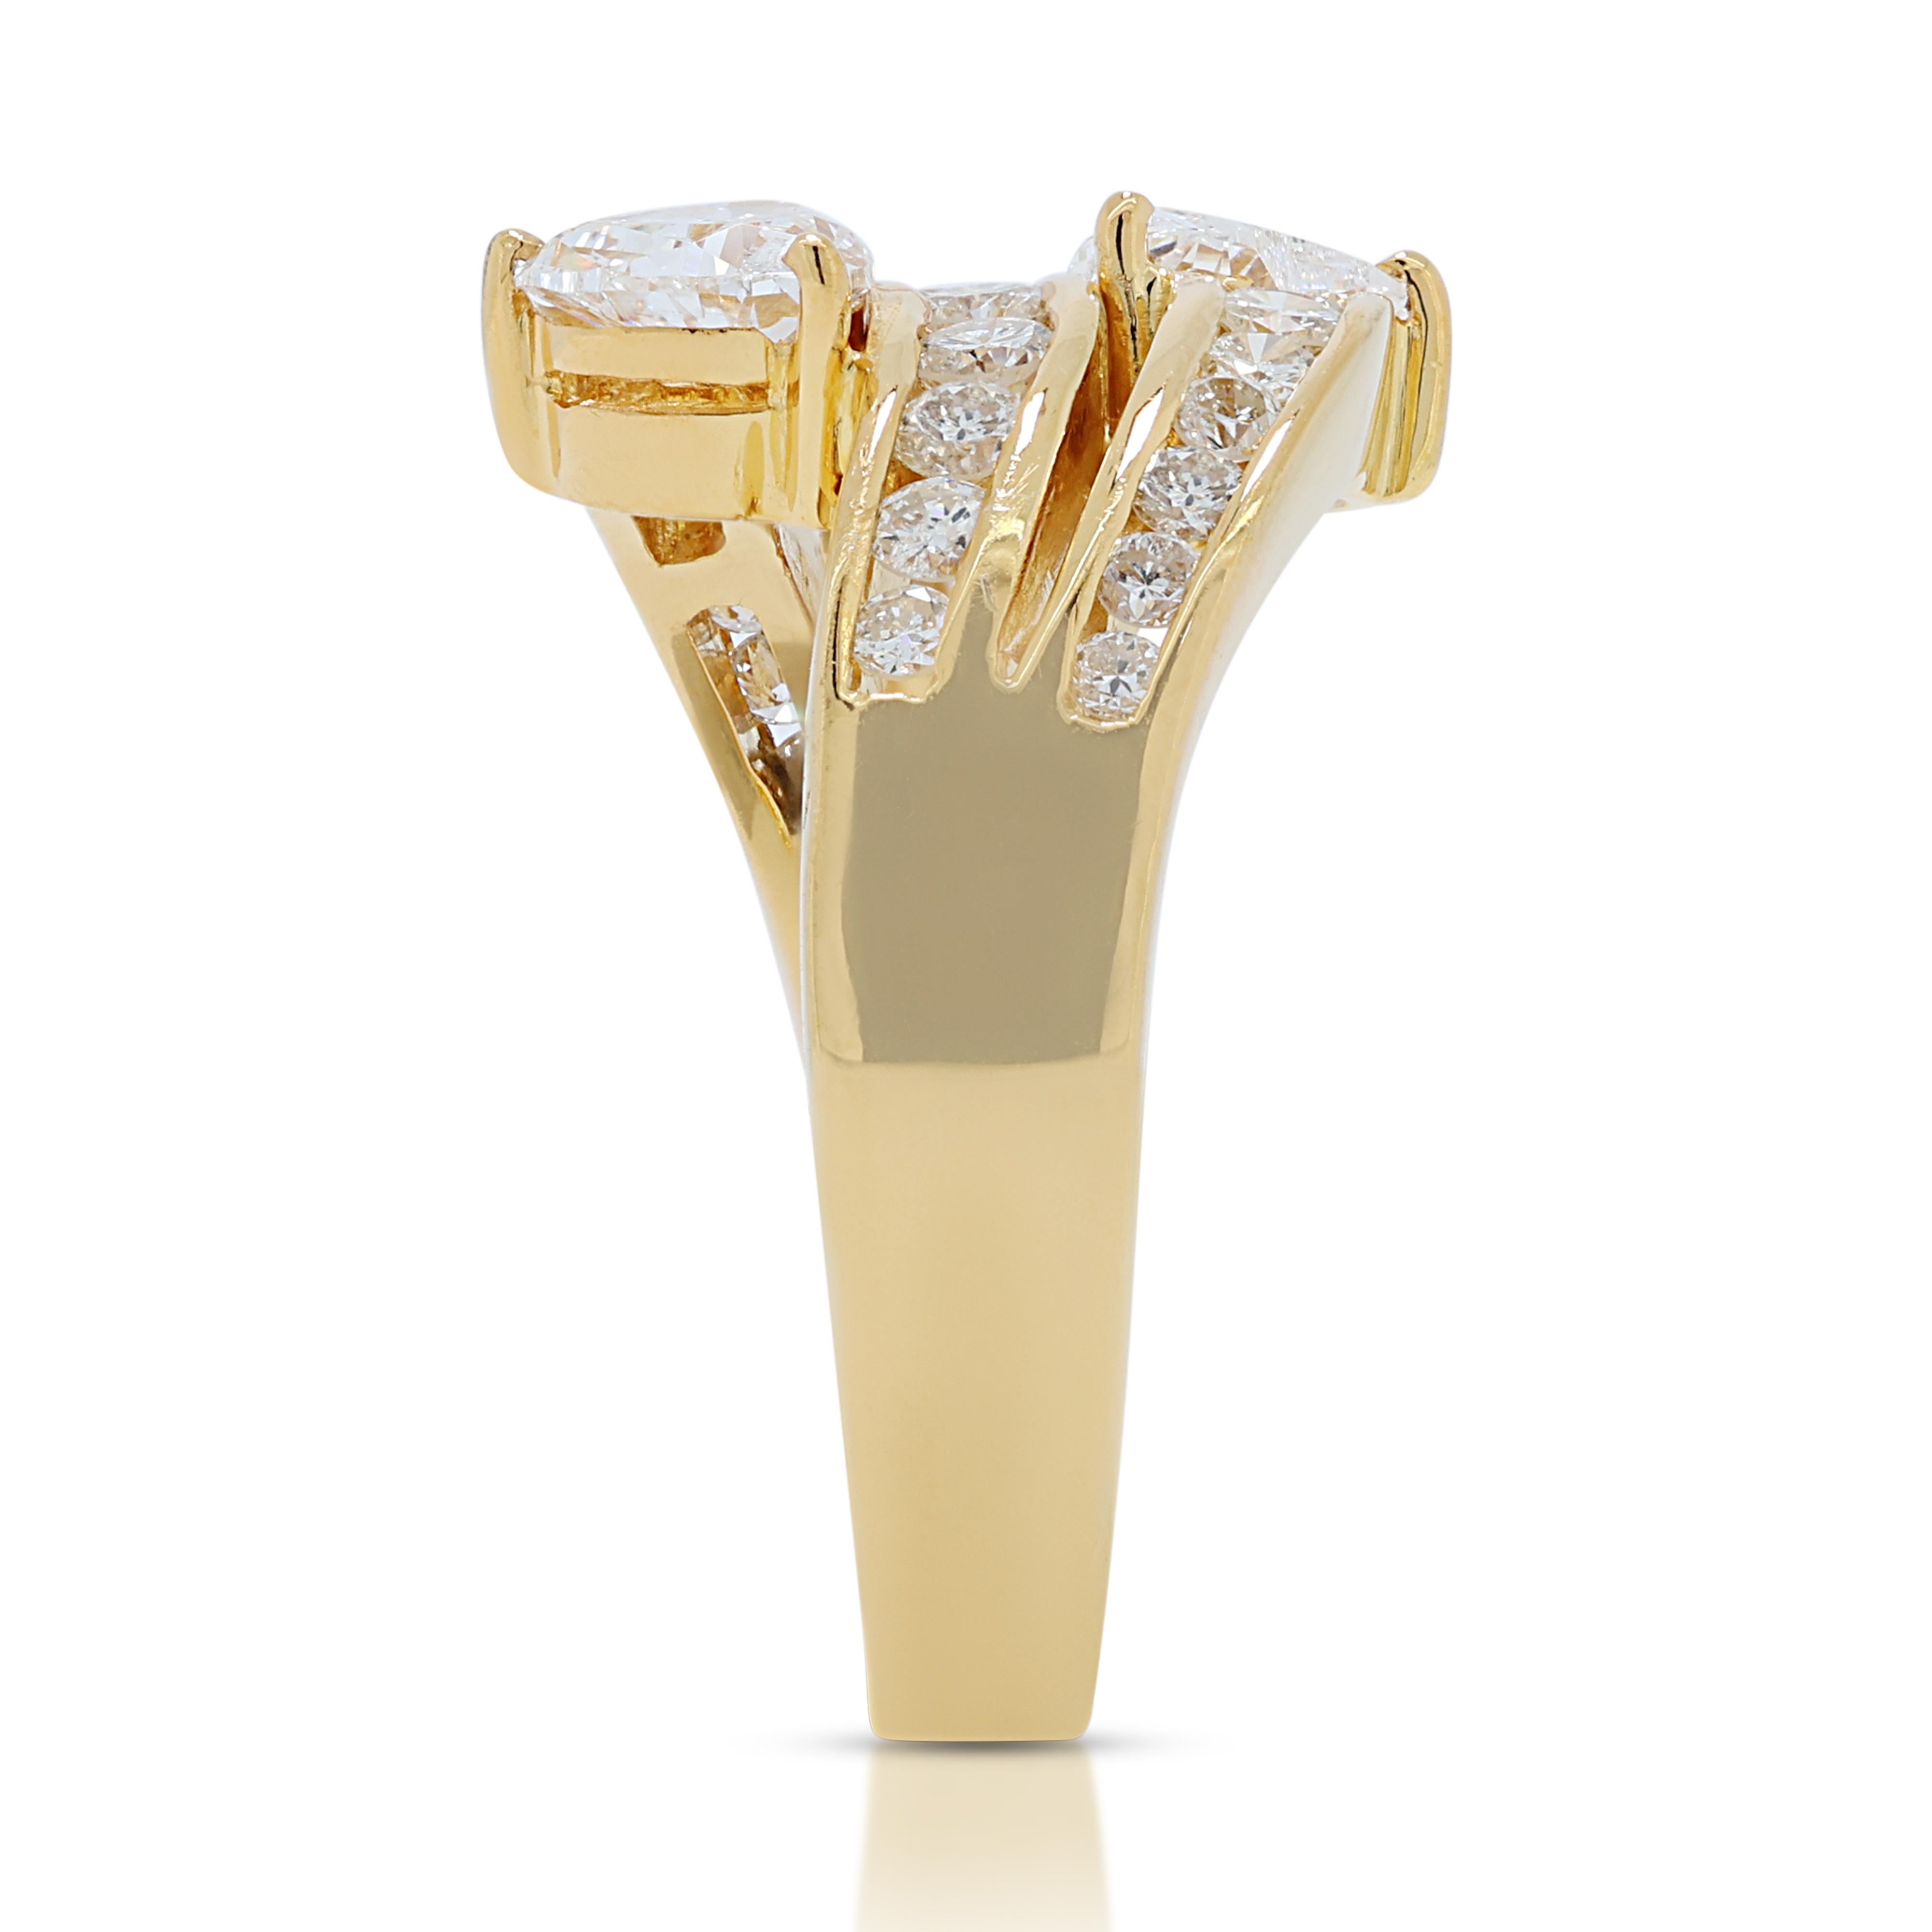 Sophisticated 1.12ct Heart-Shaped Diamonds Cluster Ring in 18k Yellow Gold For Sale 2